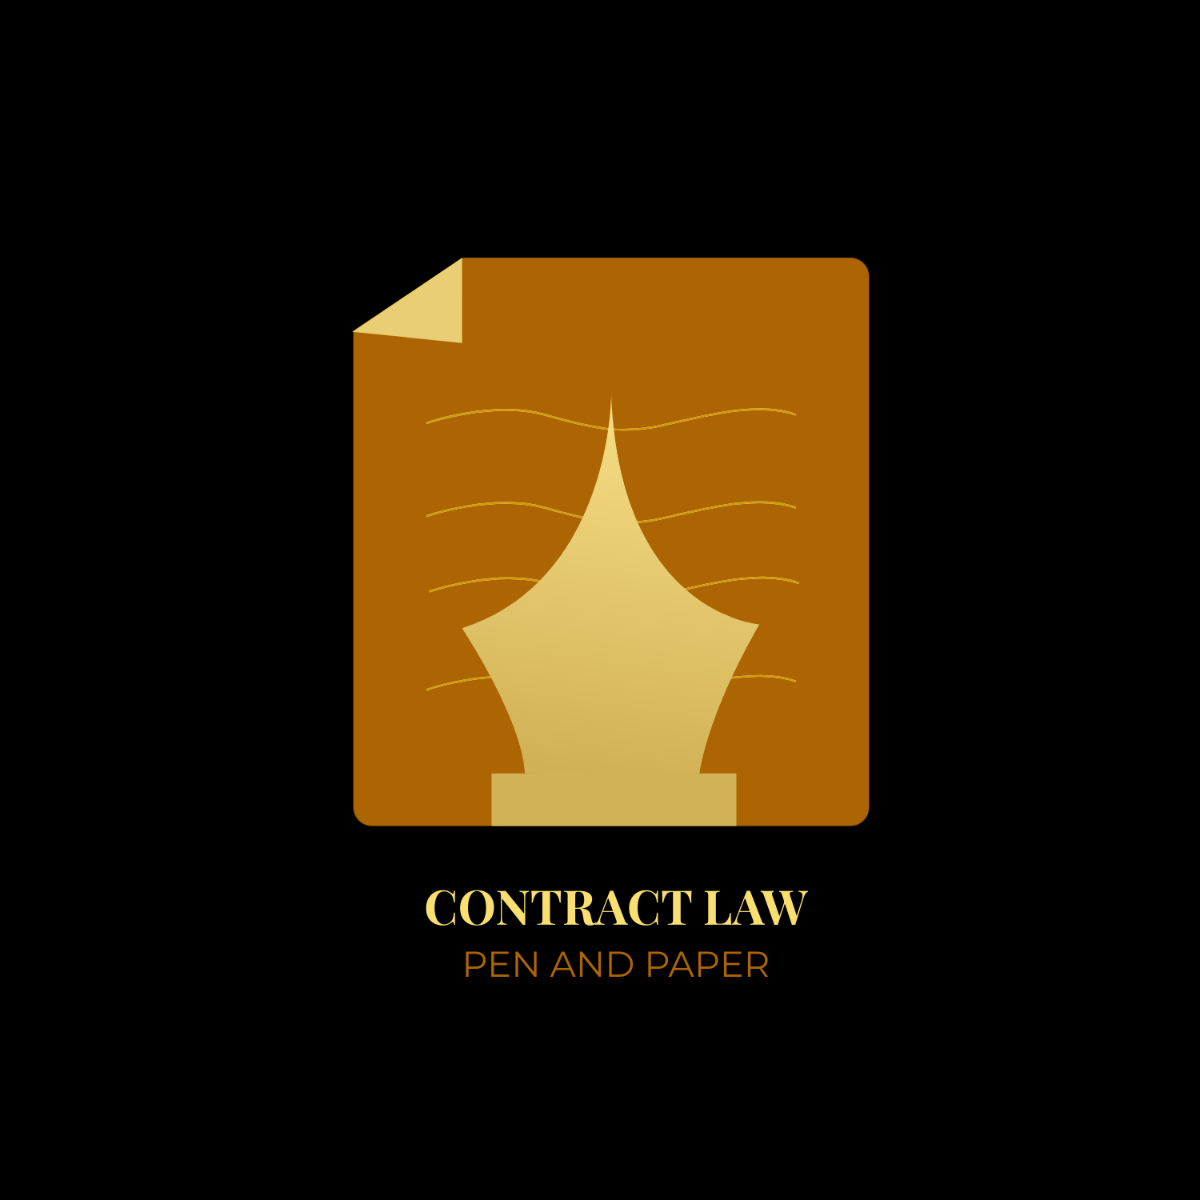 Contract Law Pen and Paper Logo Template